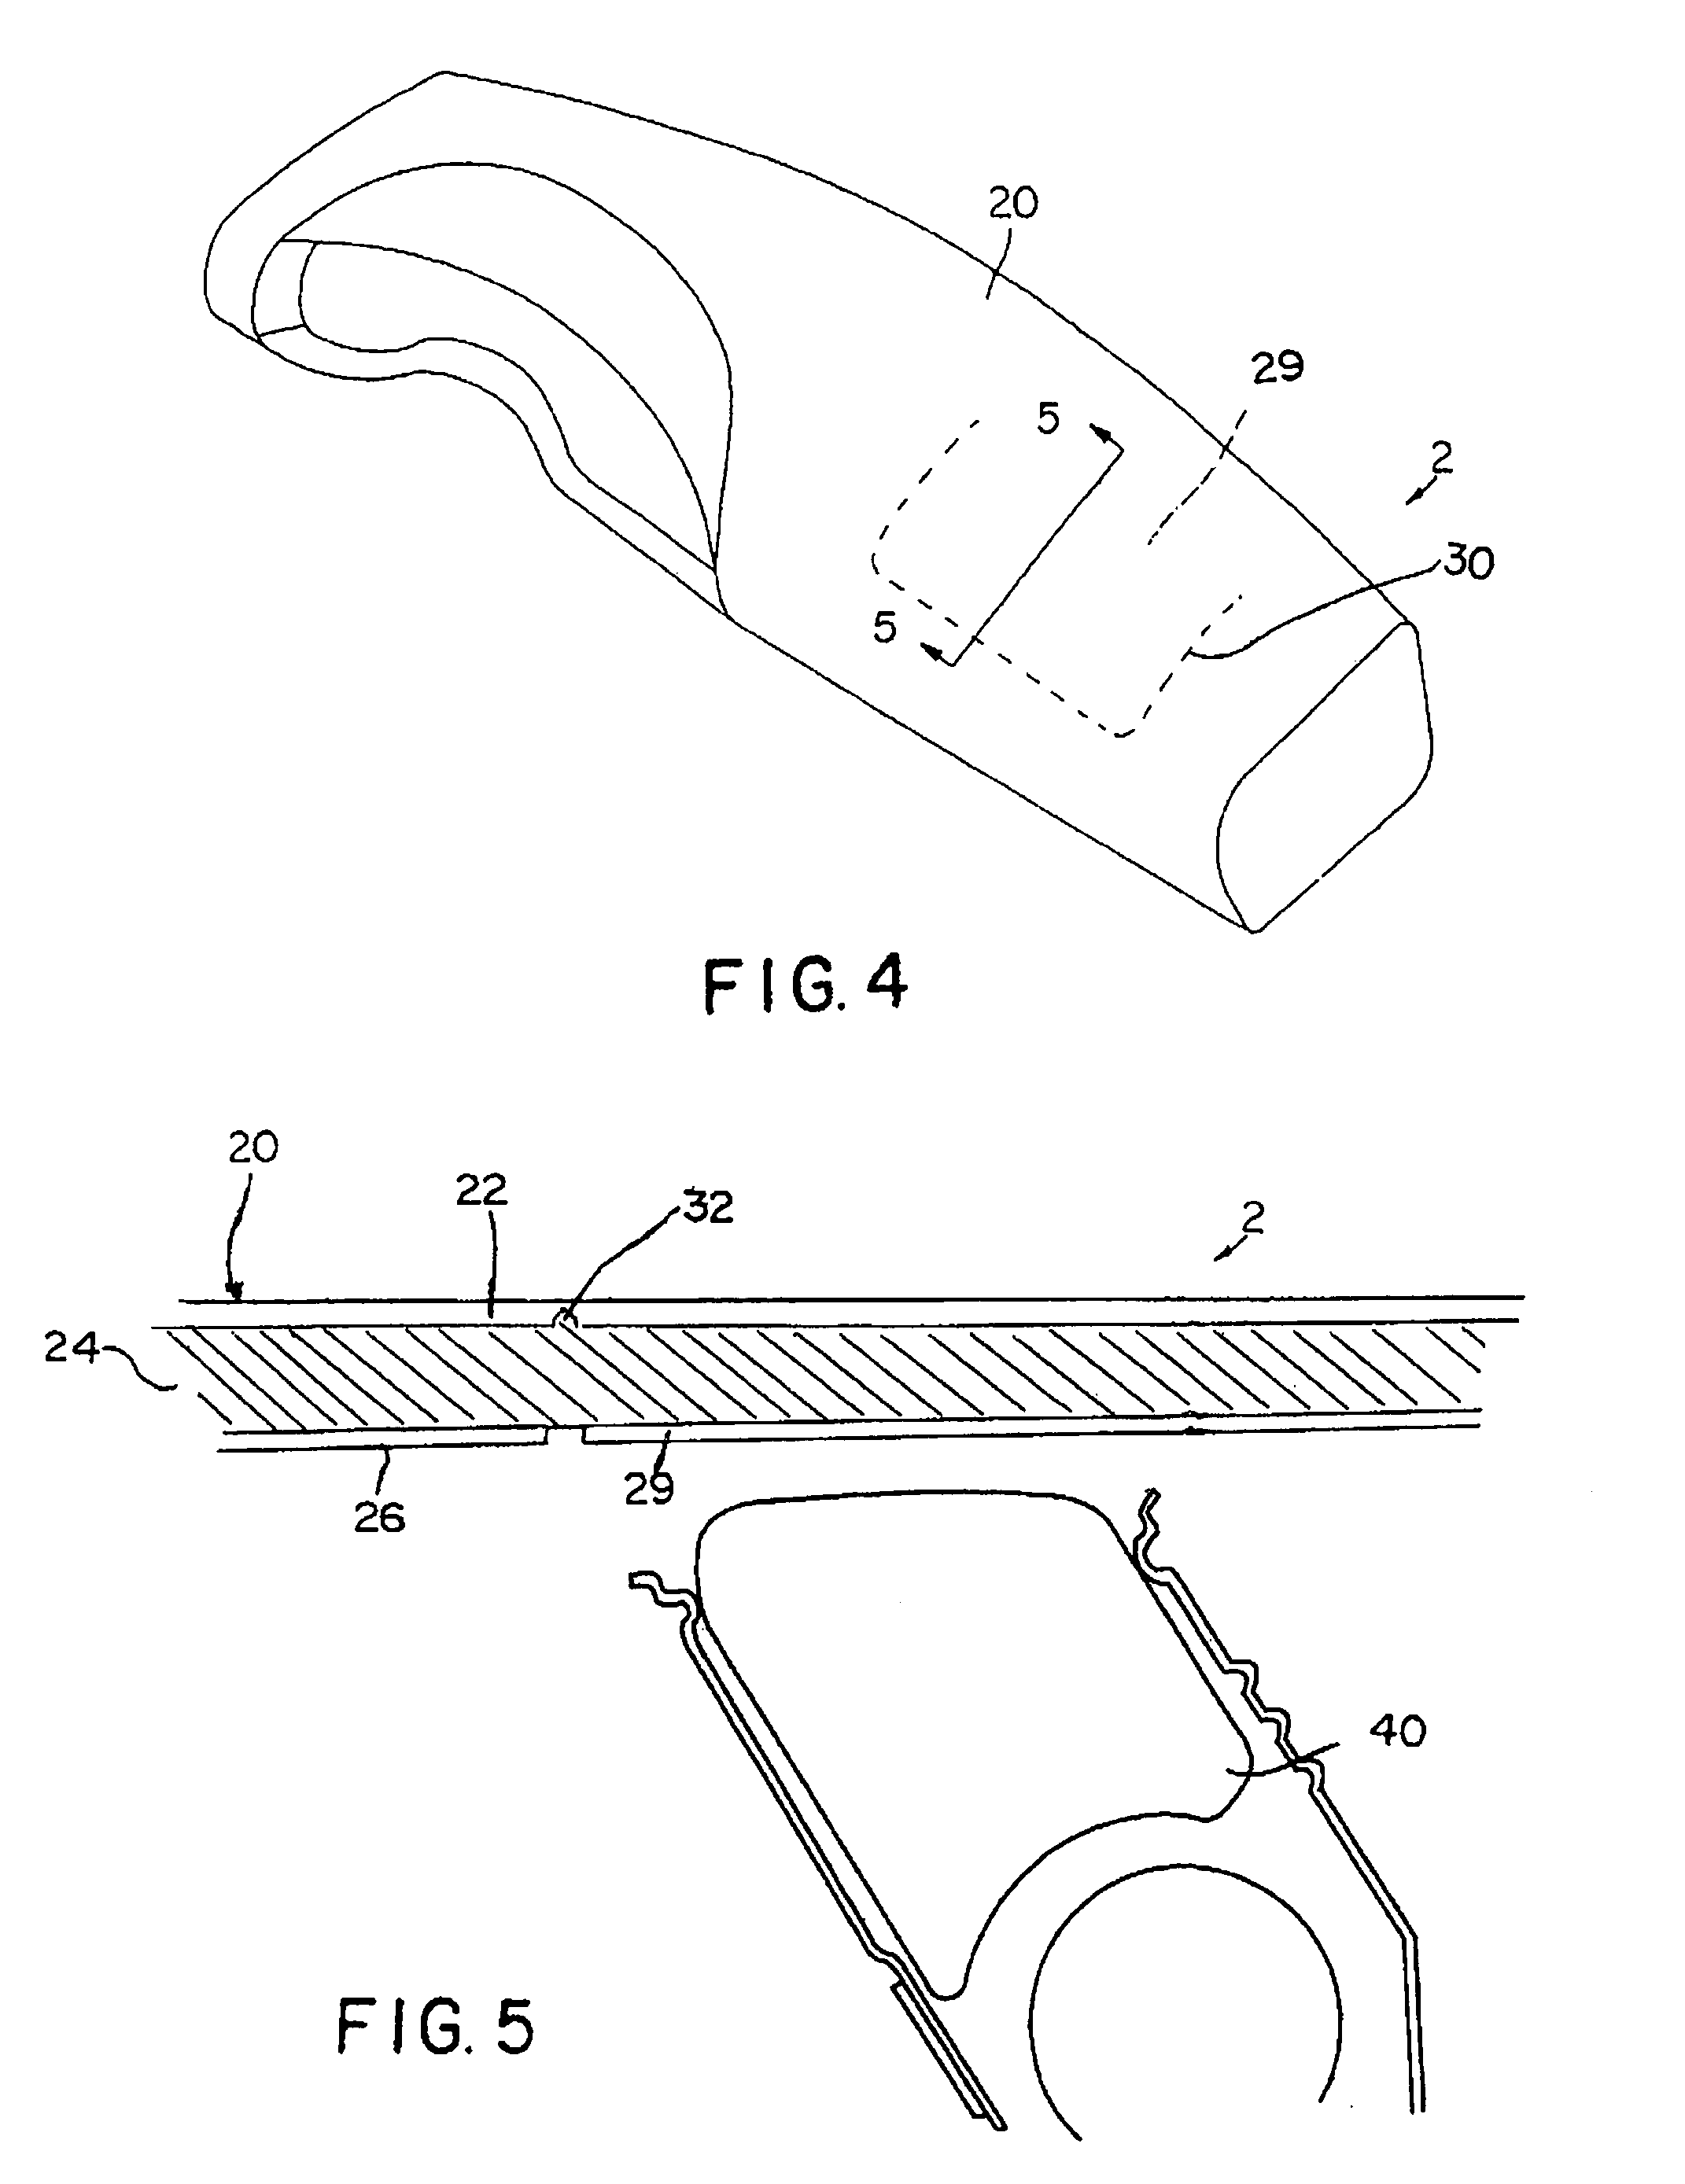 Ultrasonic blade design for scoring double angle groove and products therefrom